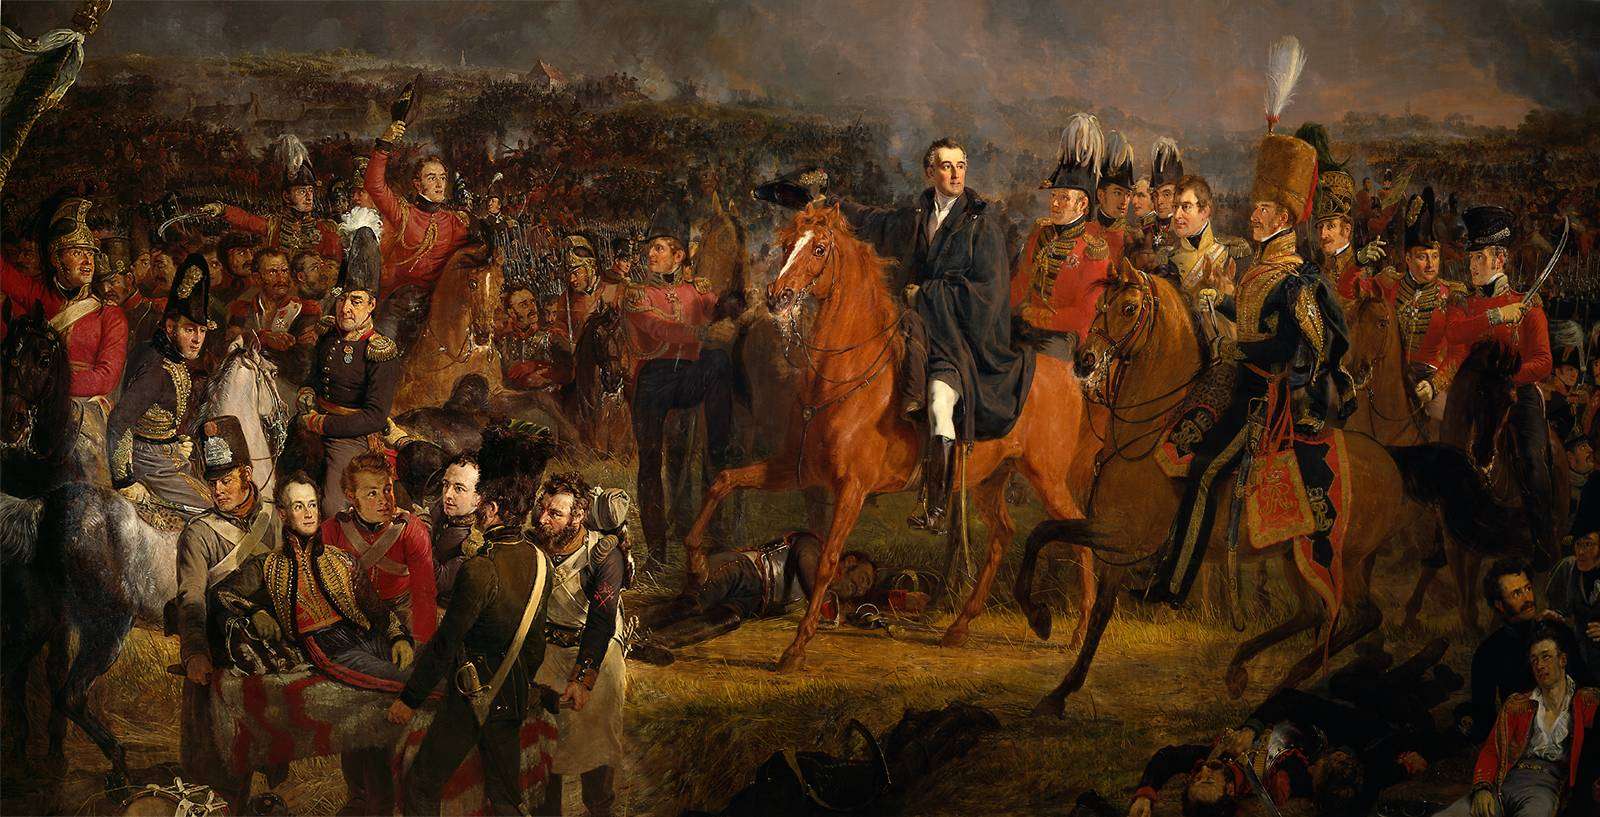 Wellington at the battle of Waterloo. Detail of a painting by Jan Willem Pieneman